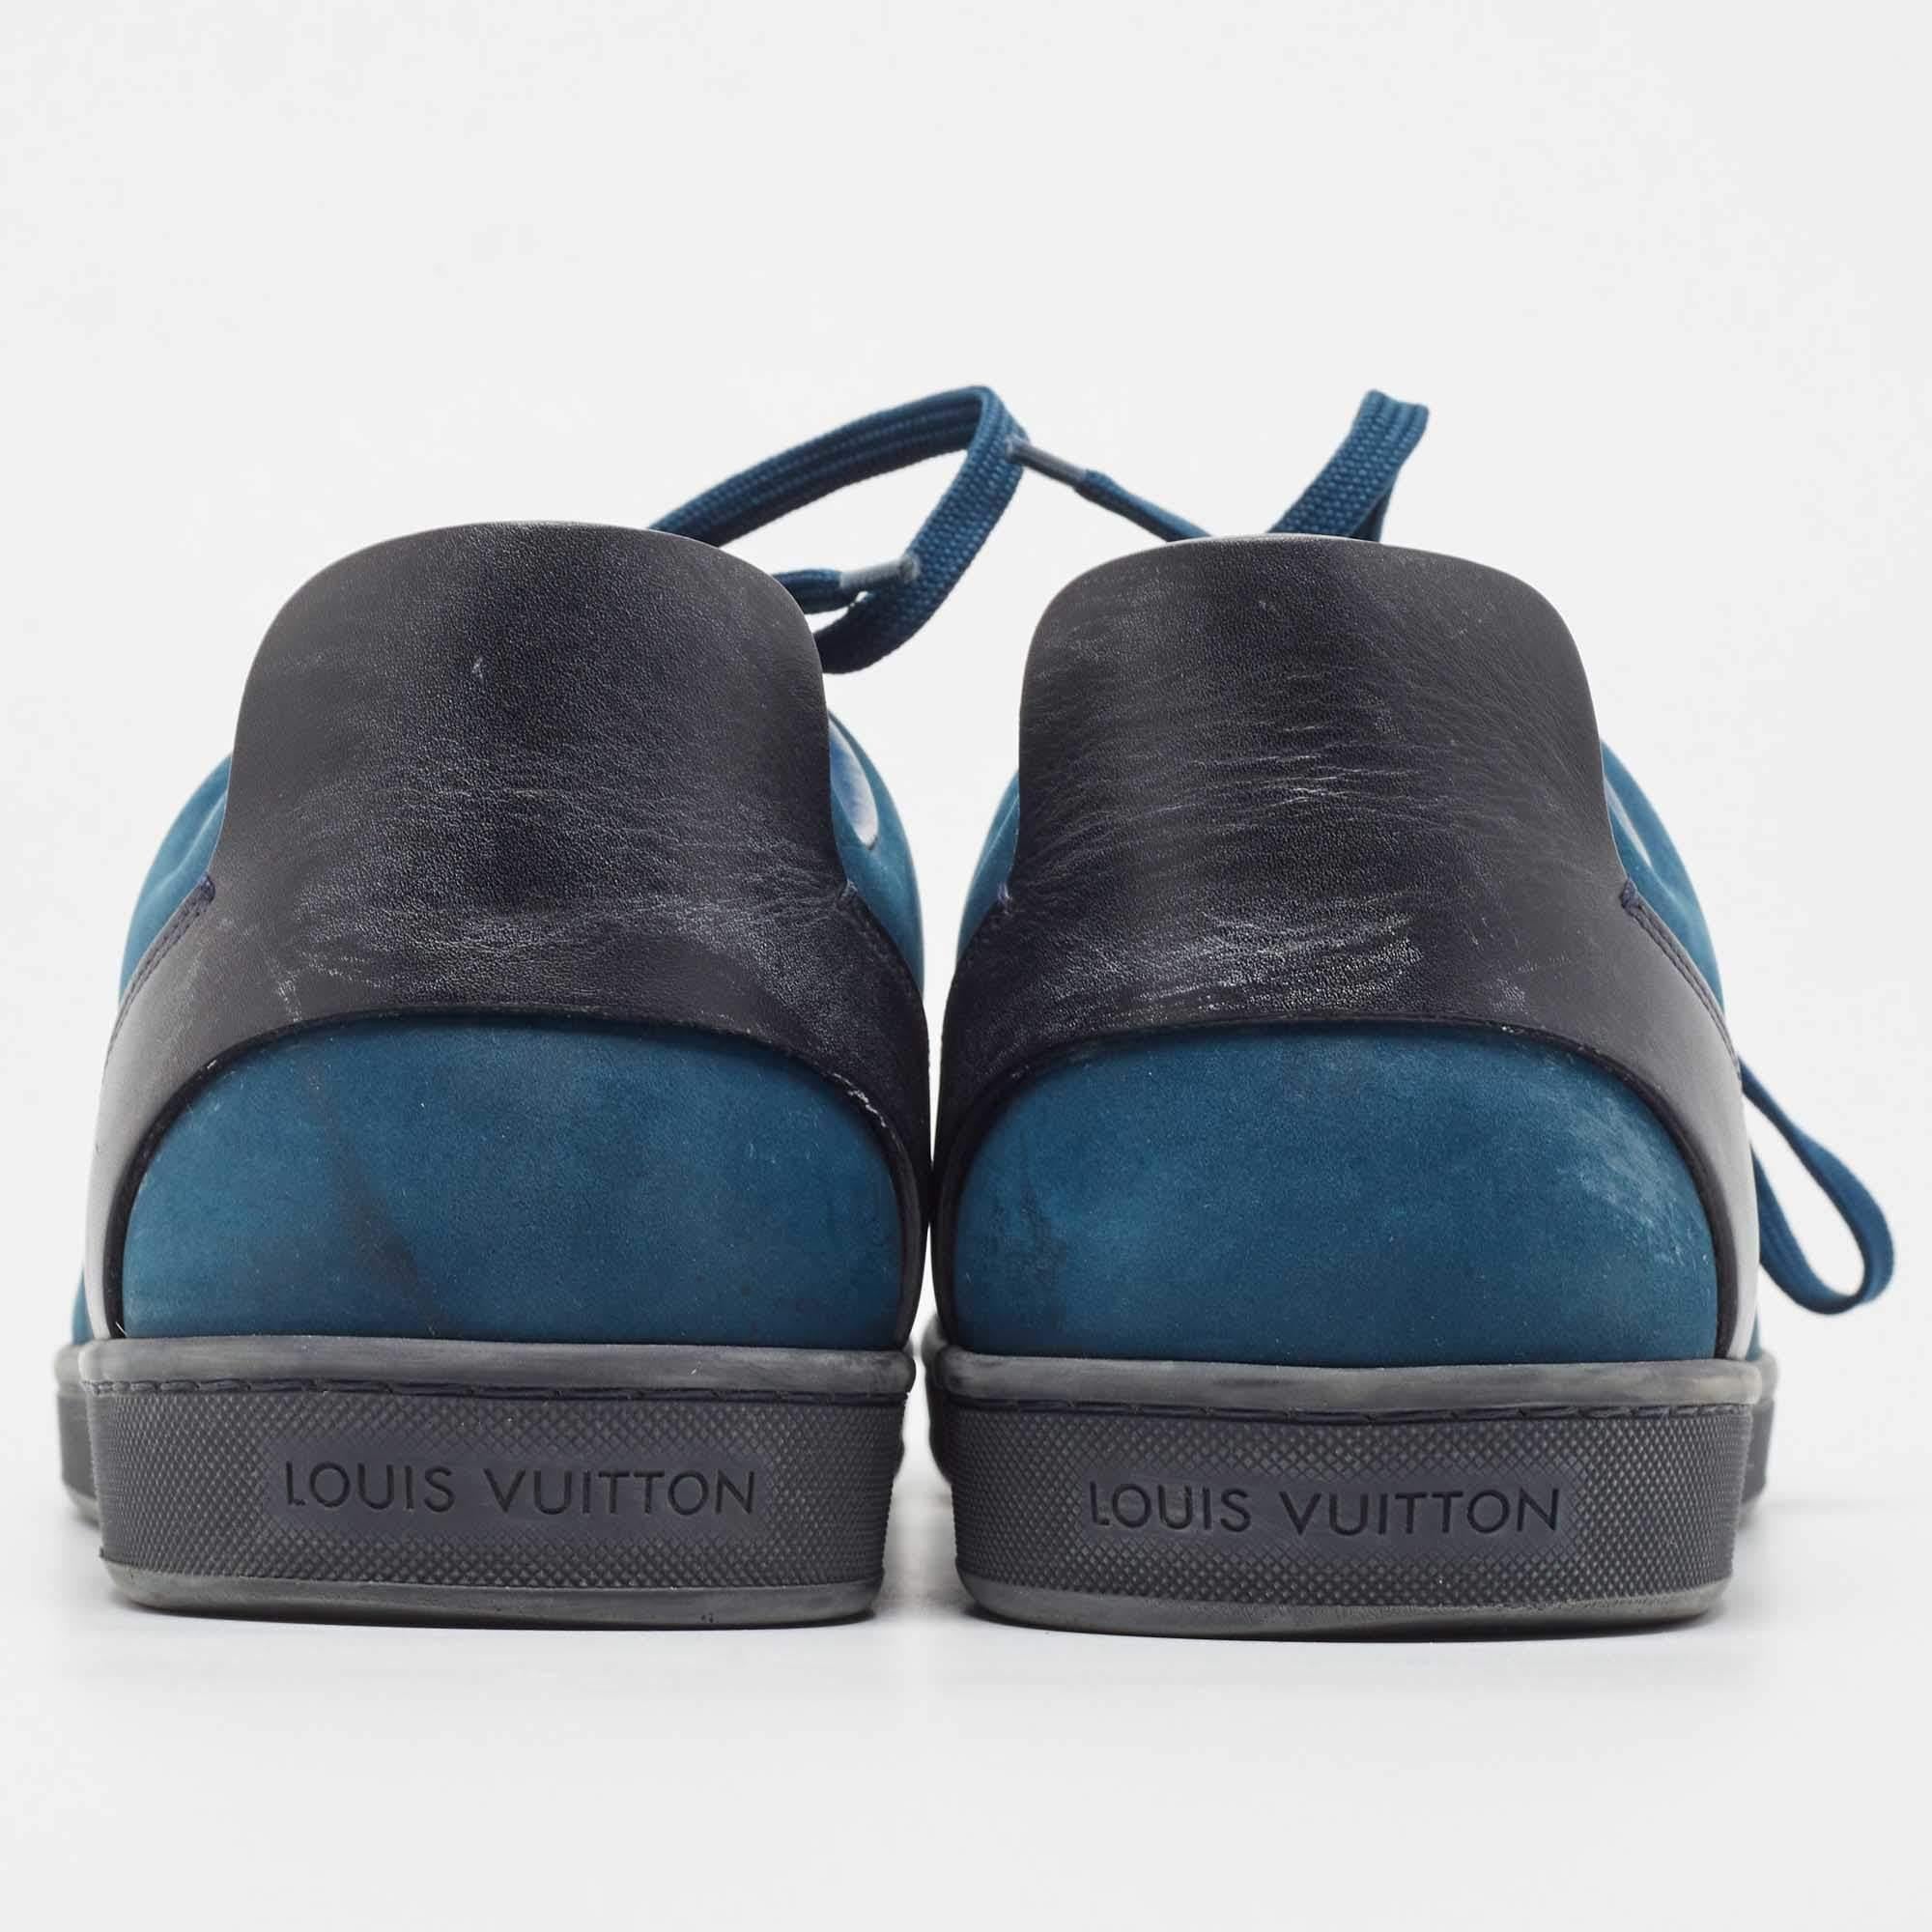 Louis Vuitton Blue Nubuck Leather Fuselage Low Top Sneakers Size 43 For Sale 1